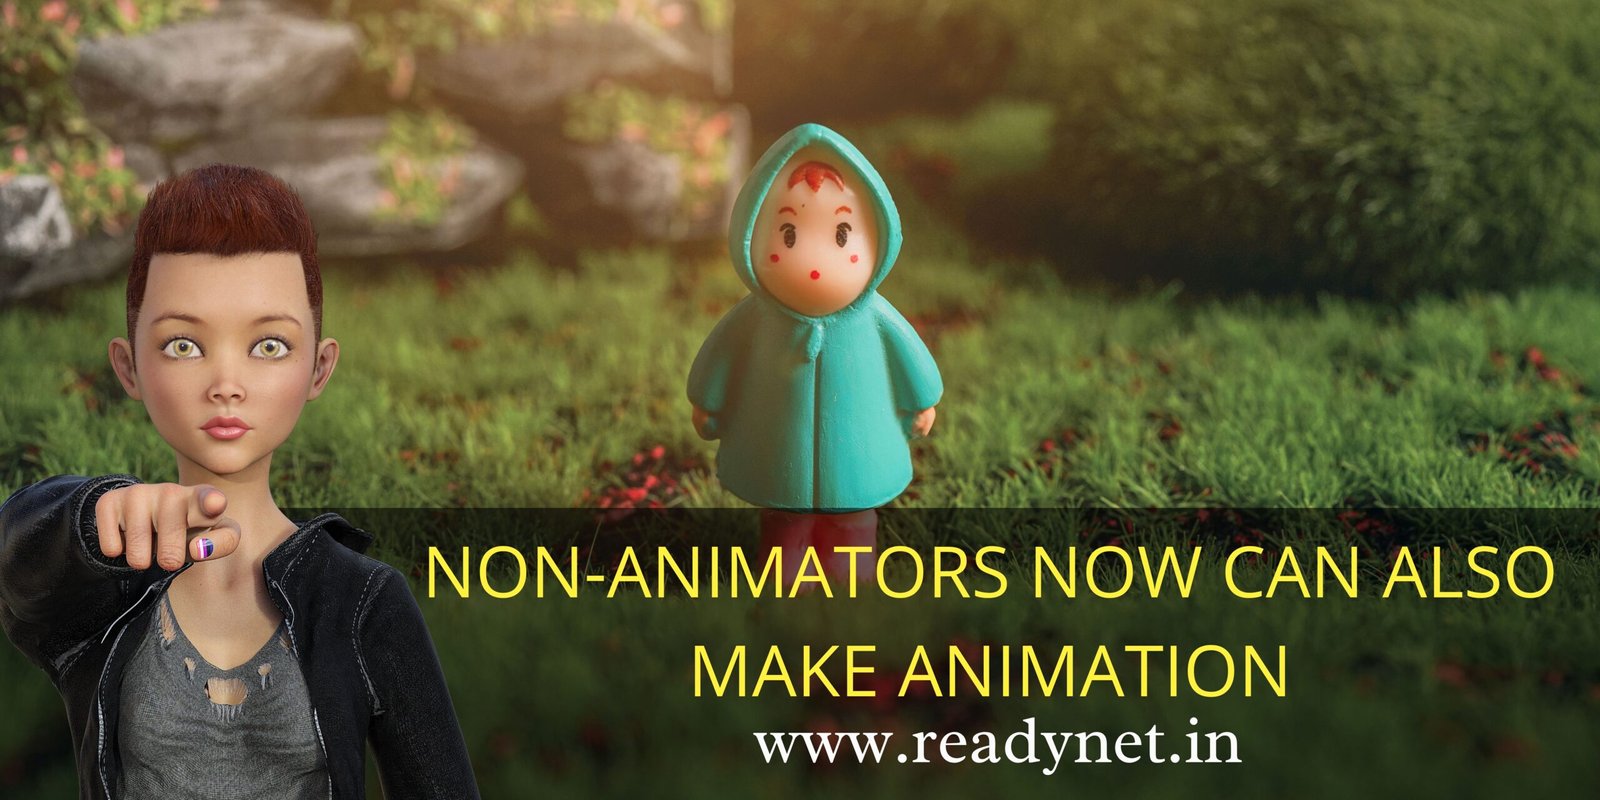 Non-animators now can also make animation